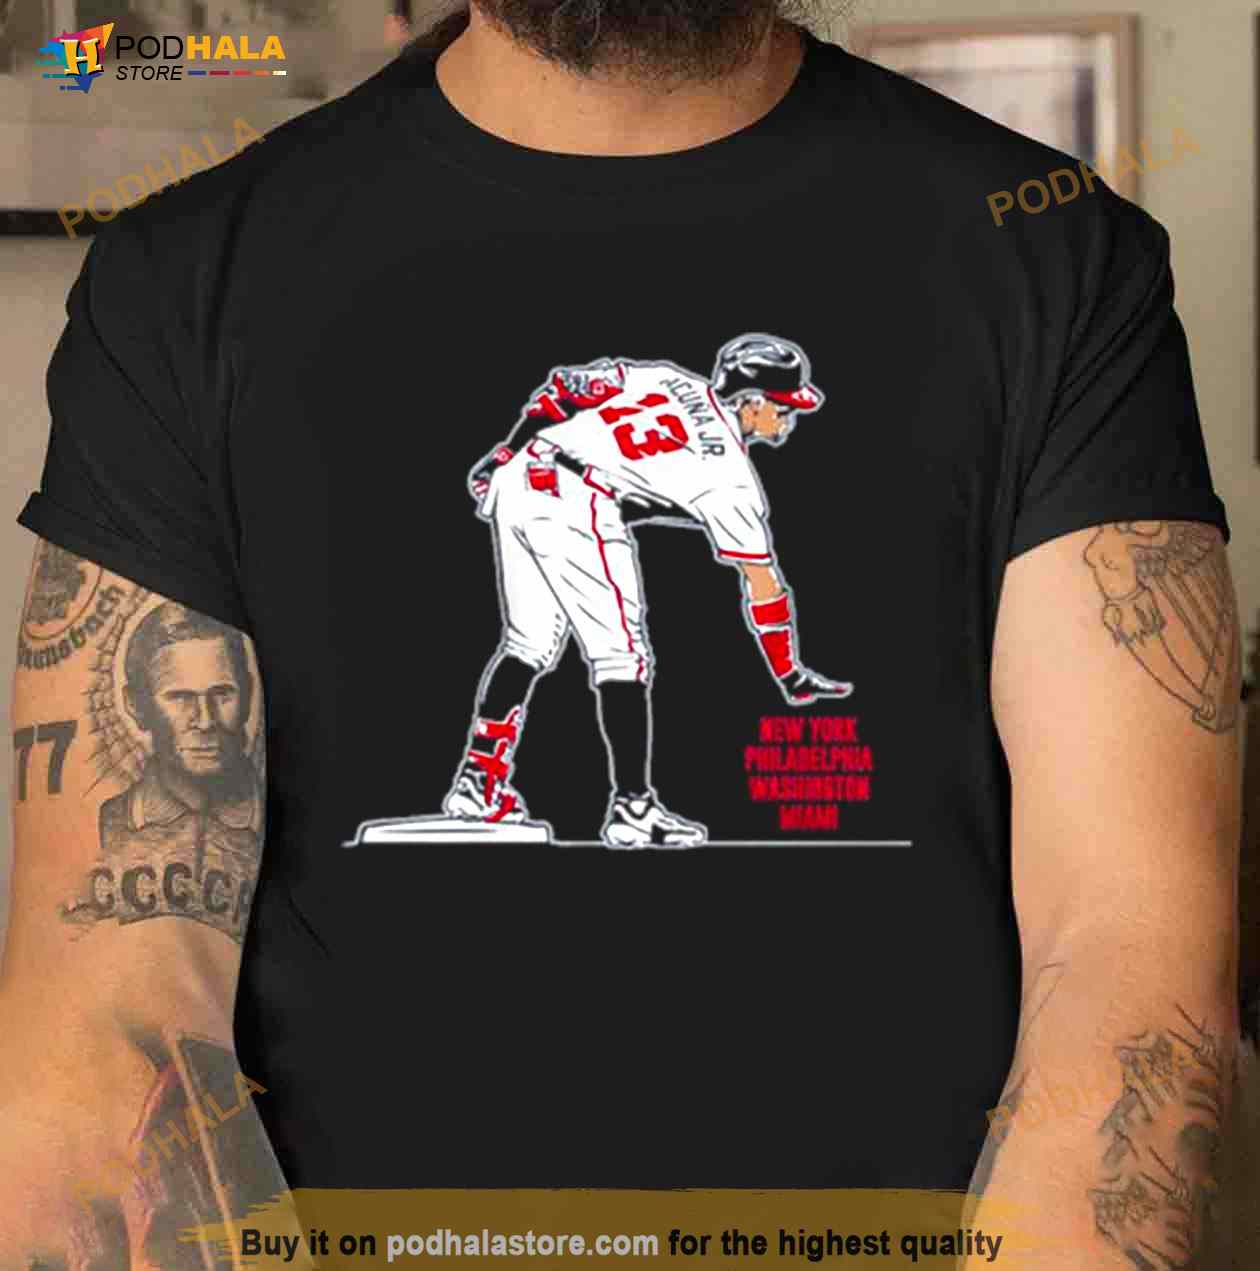 Vintage Braves Shirt 3D Irresistible Atlanta Braves Gift - Personalized  Gifts: Family, Sports, Occasions, Trending